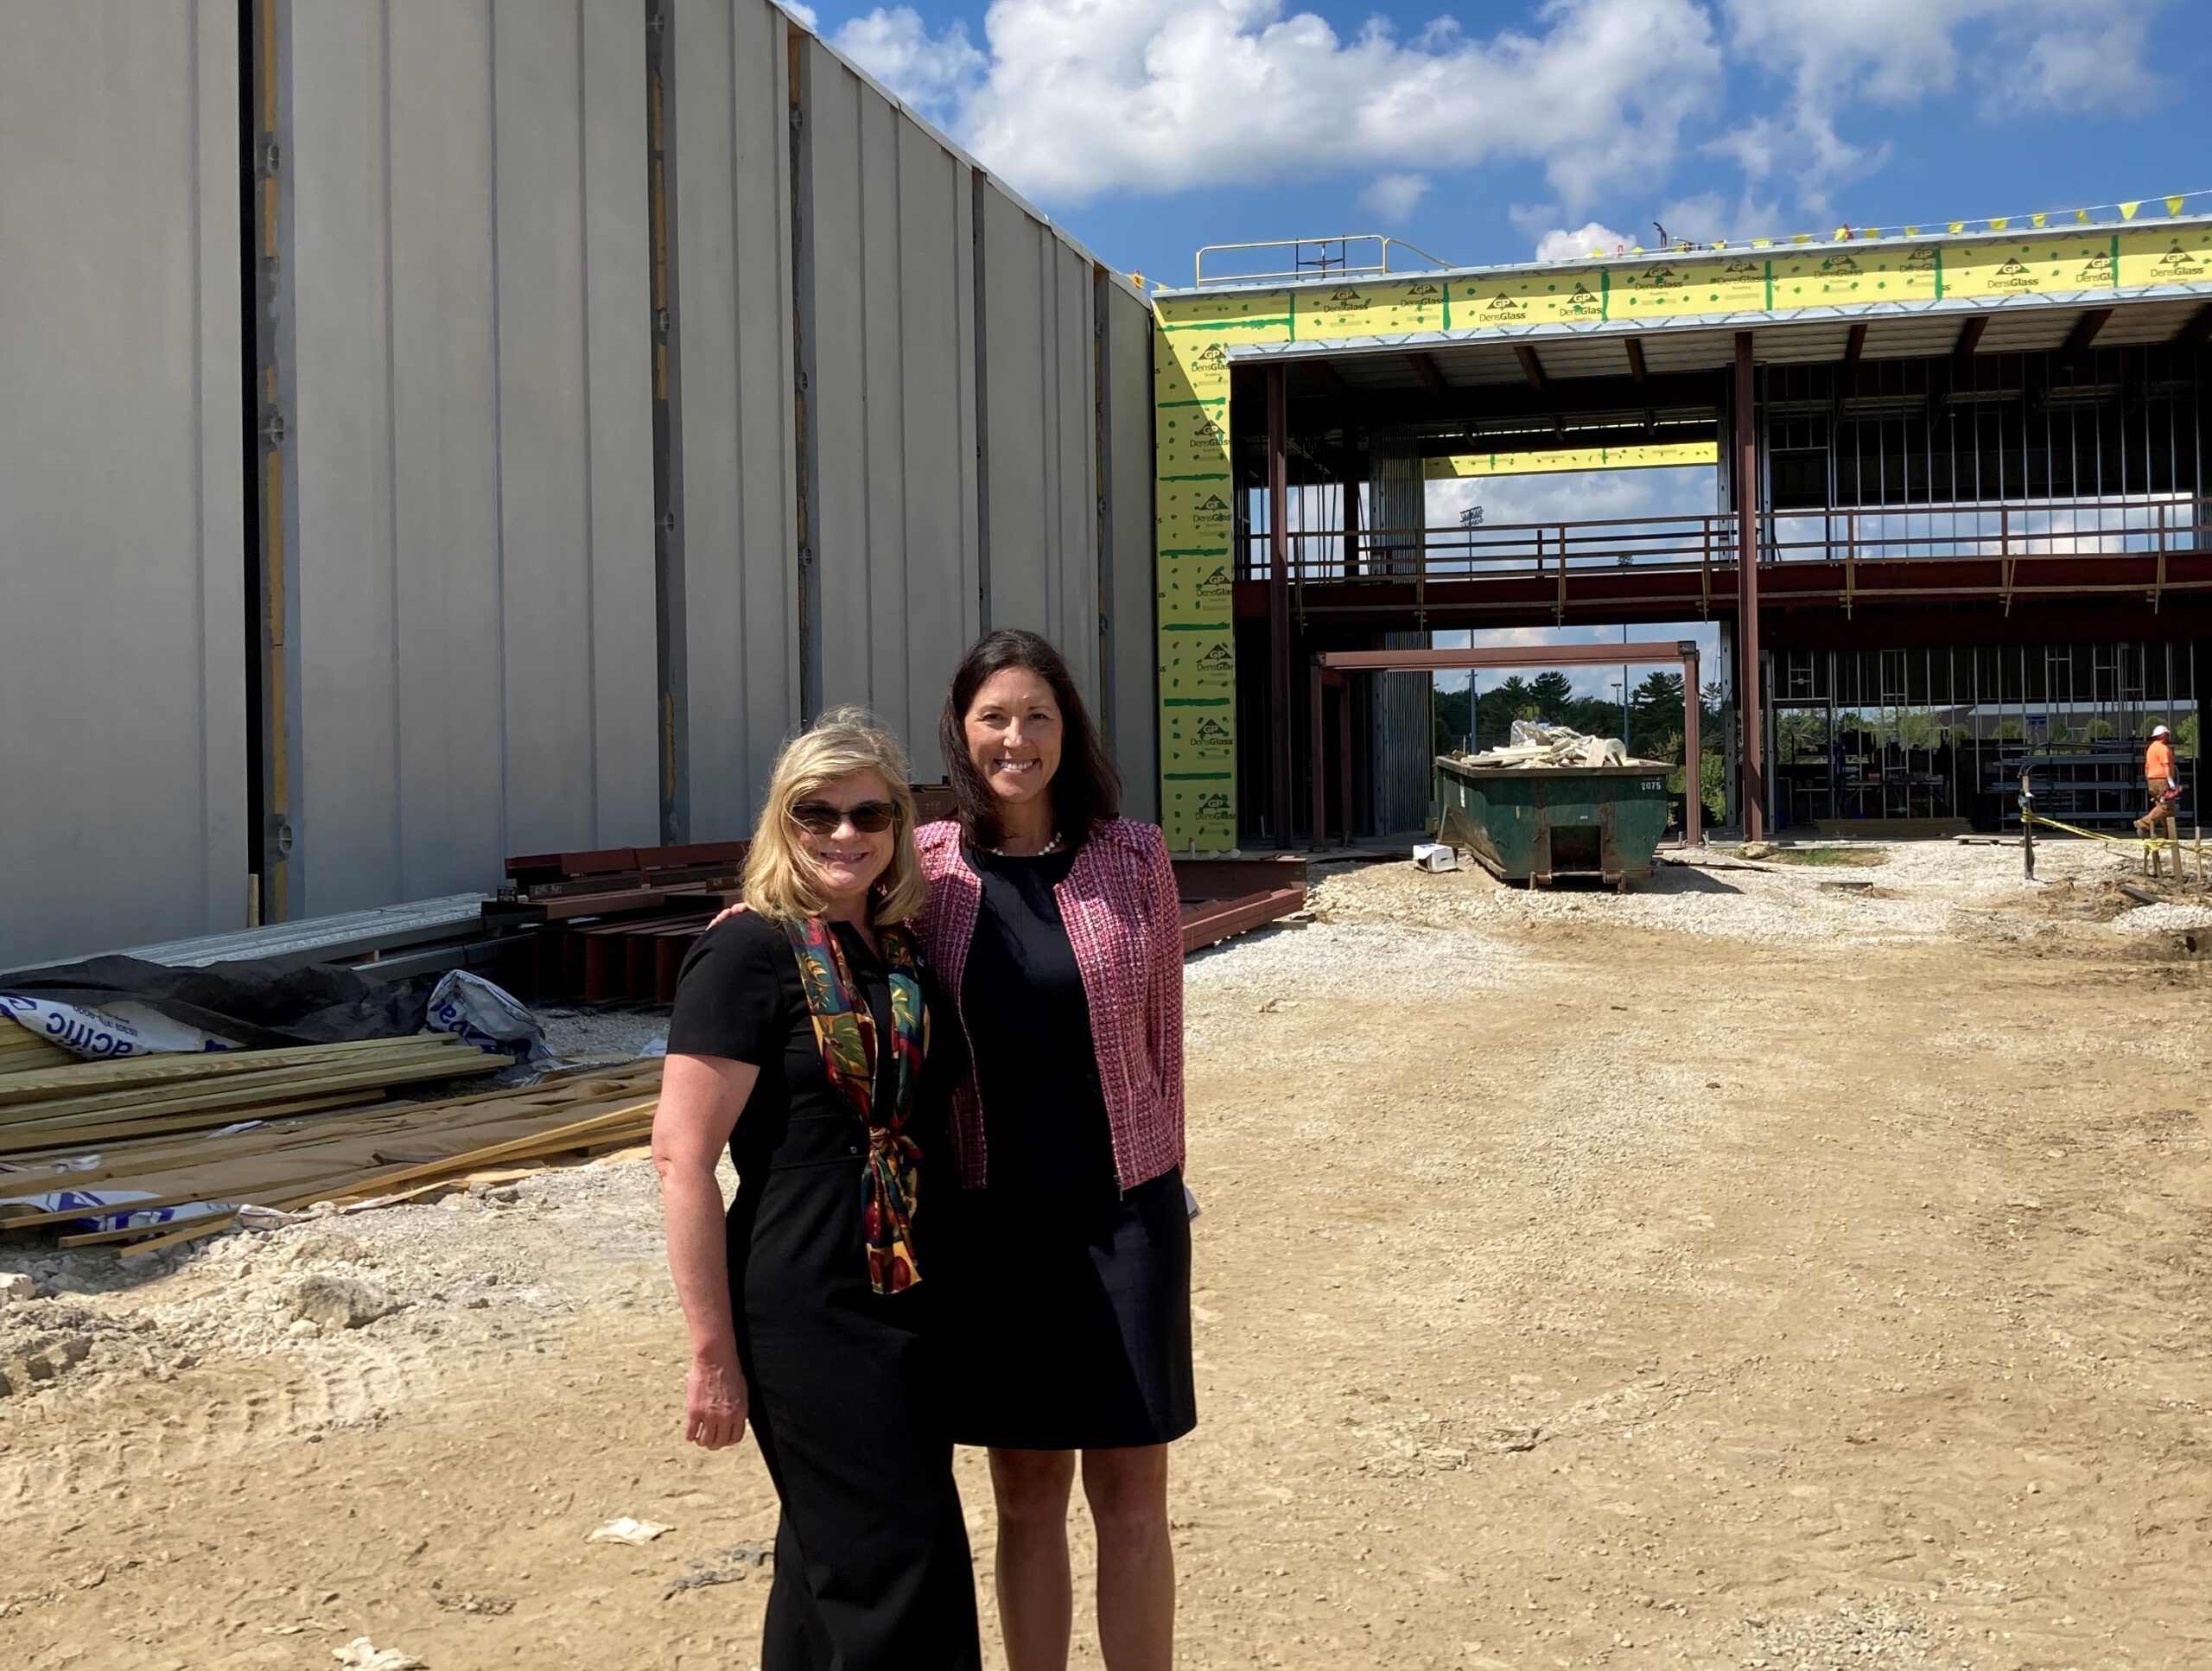 (Susan Brehm and Dr. Quirk-Bailey pictured below in front of the Workforce Sustainability Center.)